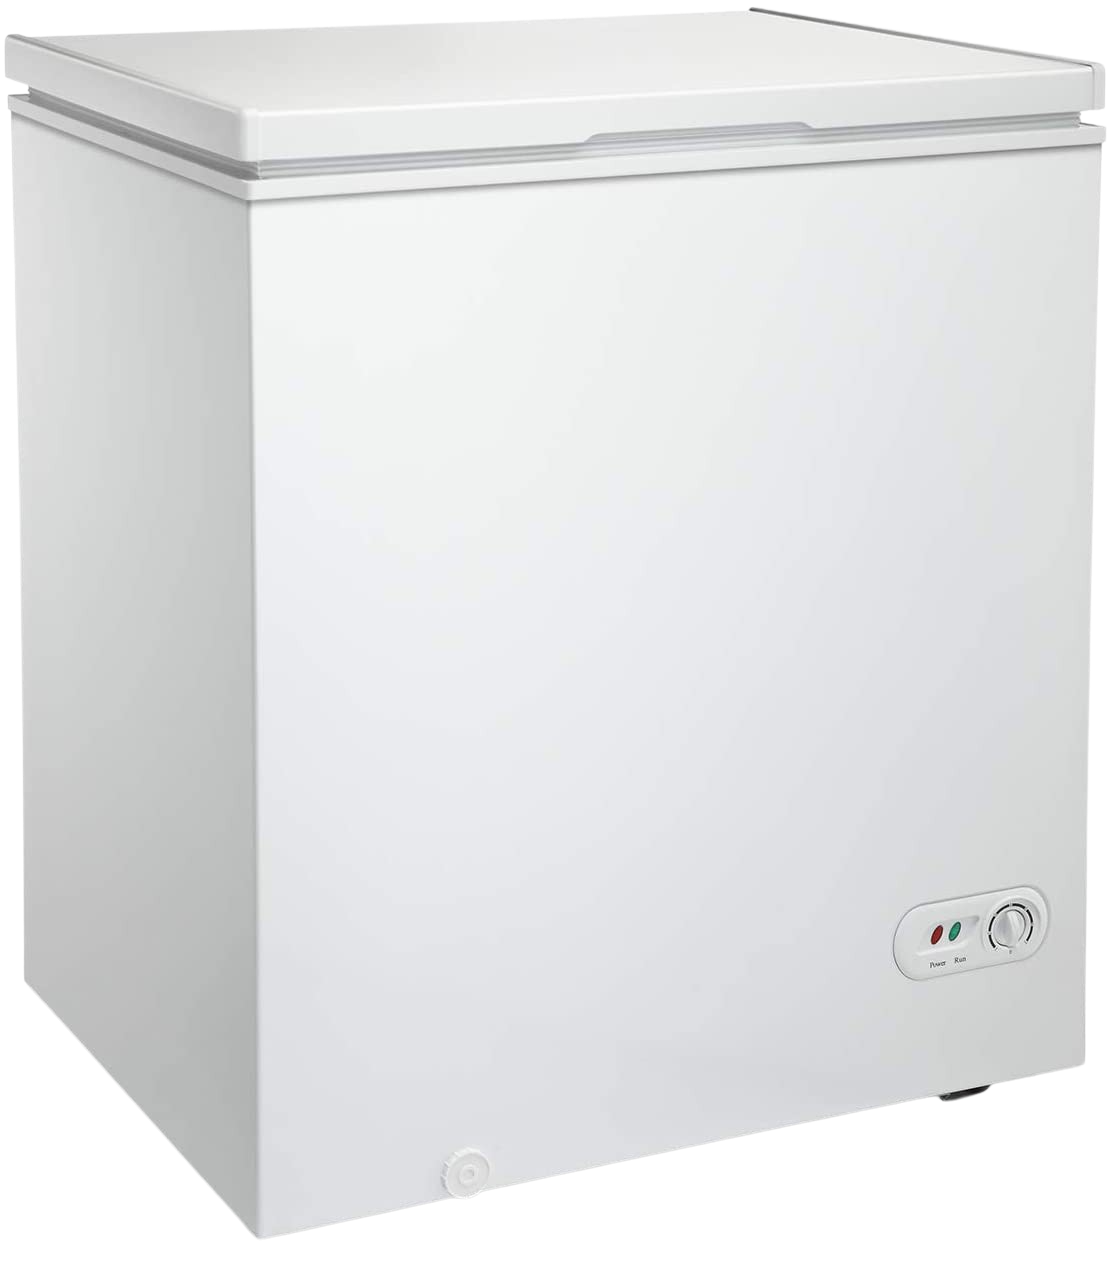 RW FLAME, RW Flame D15W Compact Upright 5.0 Cubic Feet Chest Freezer White New